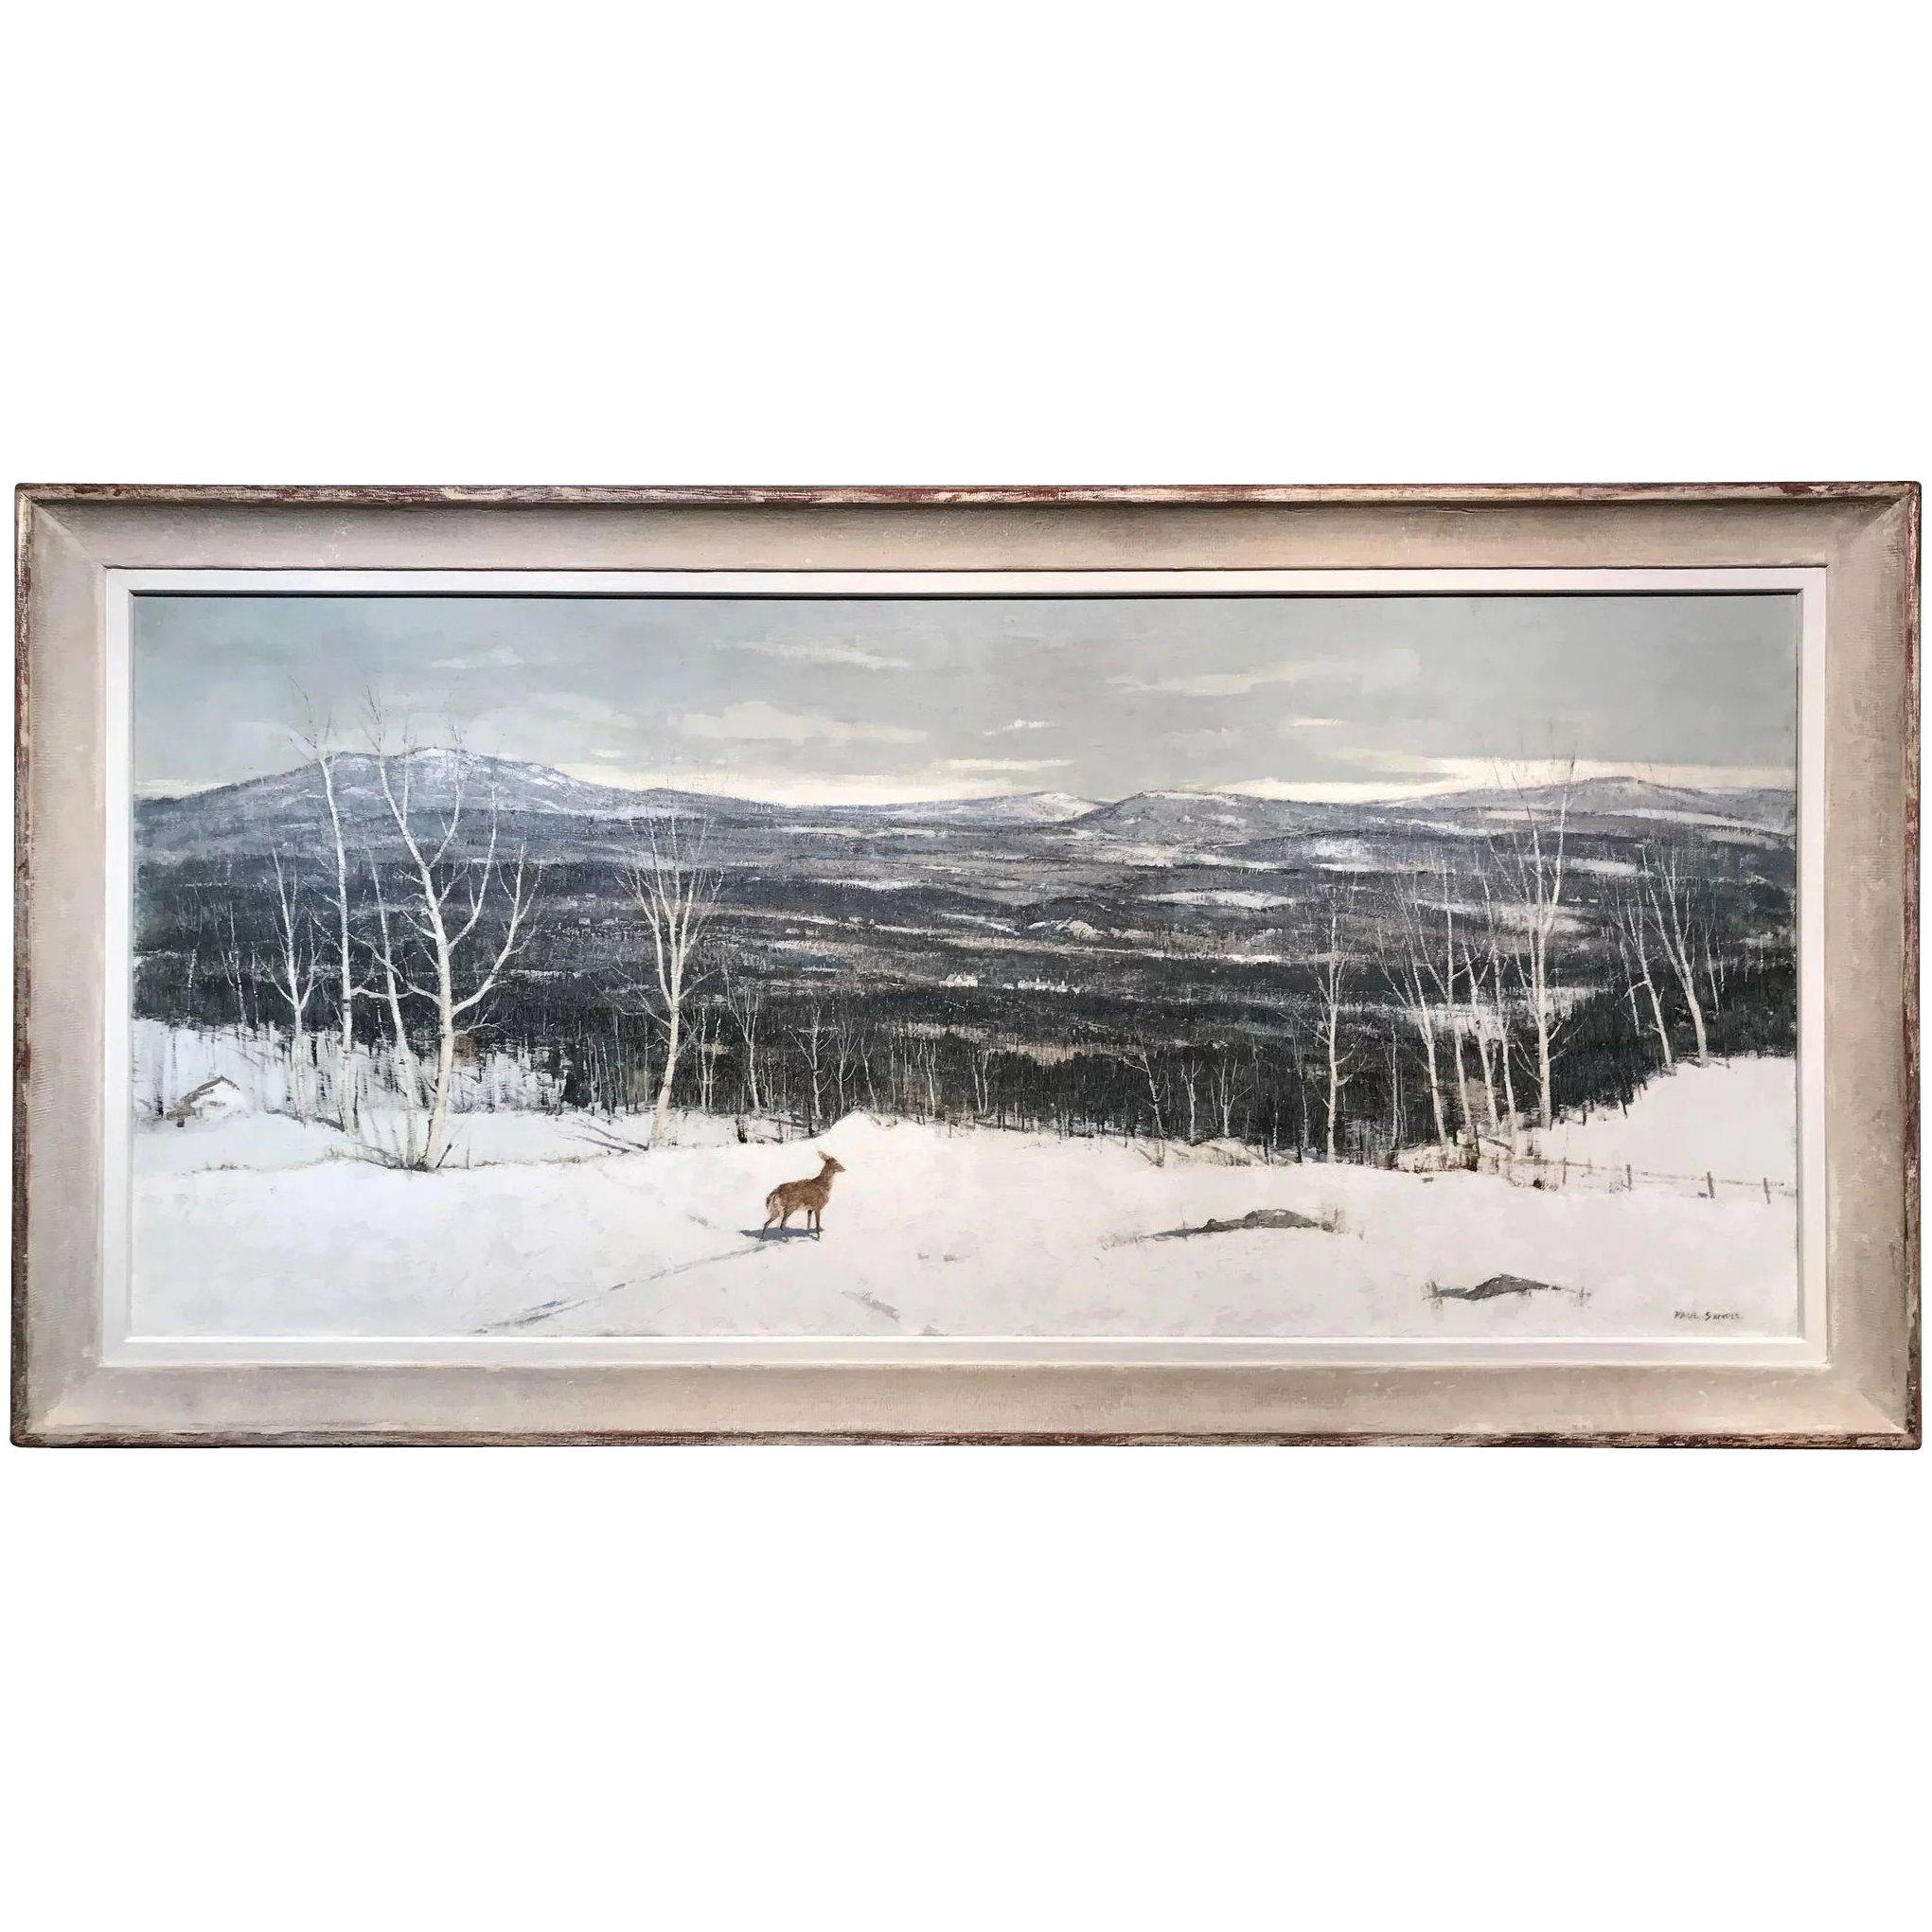 View of Verney Farm, Bennington NH - Painting by Paul Sample